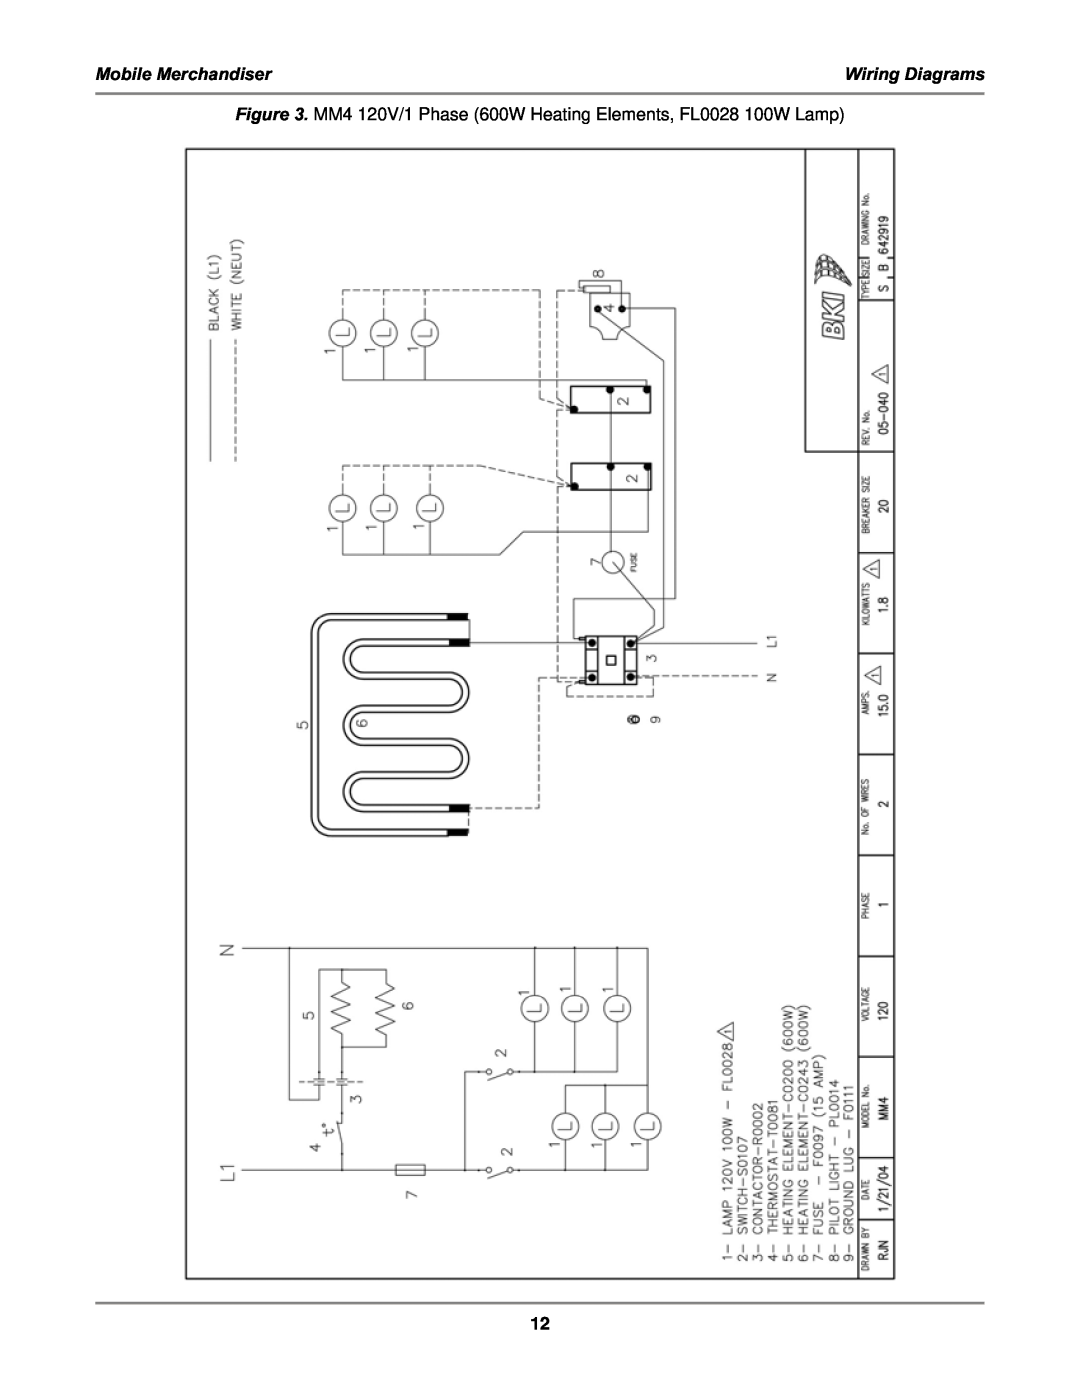 Bakers Pride Oven MM4, MM6 service manual Wiring Diagrams, Mobile Merchandiser 